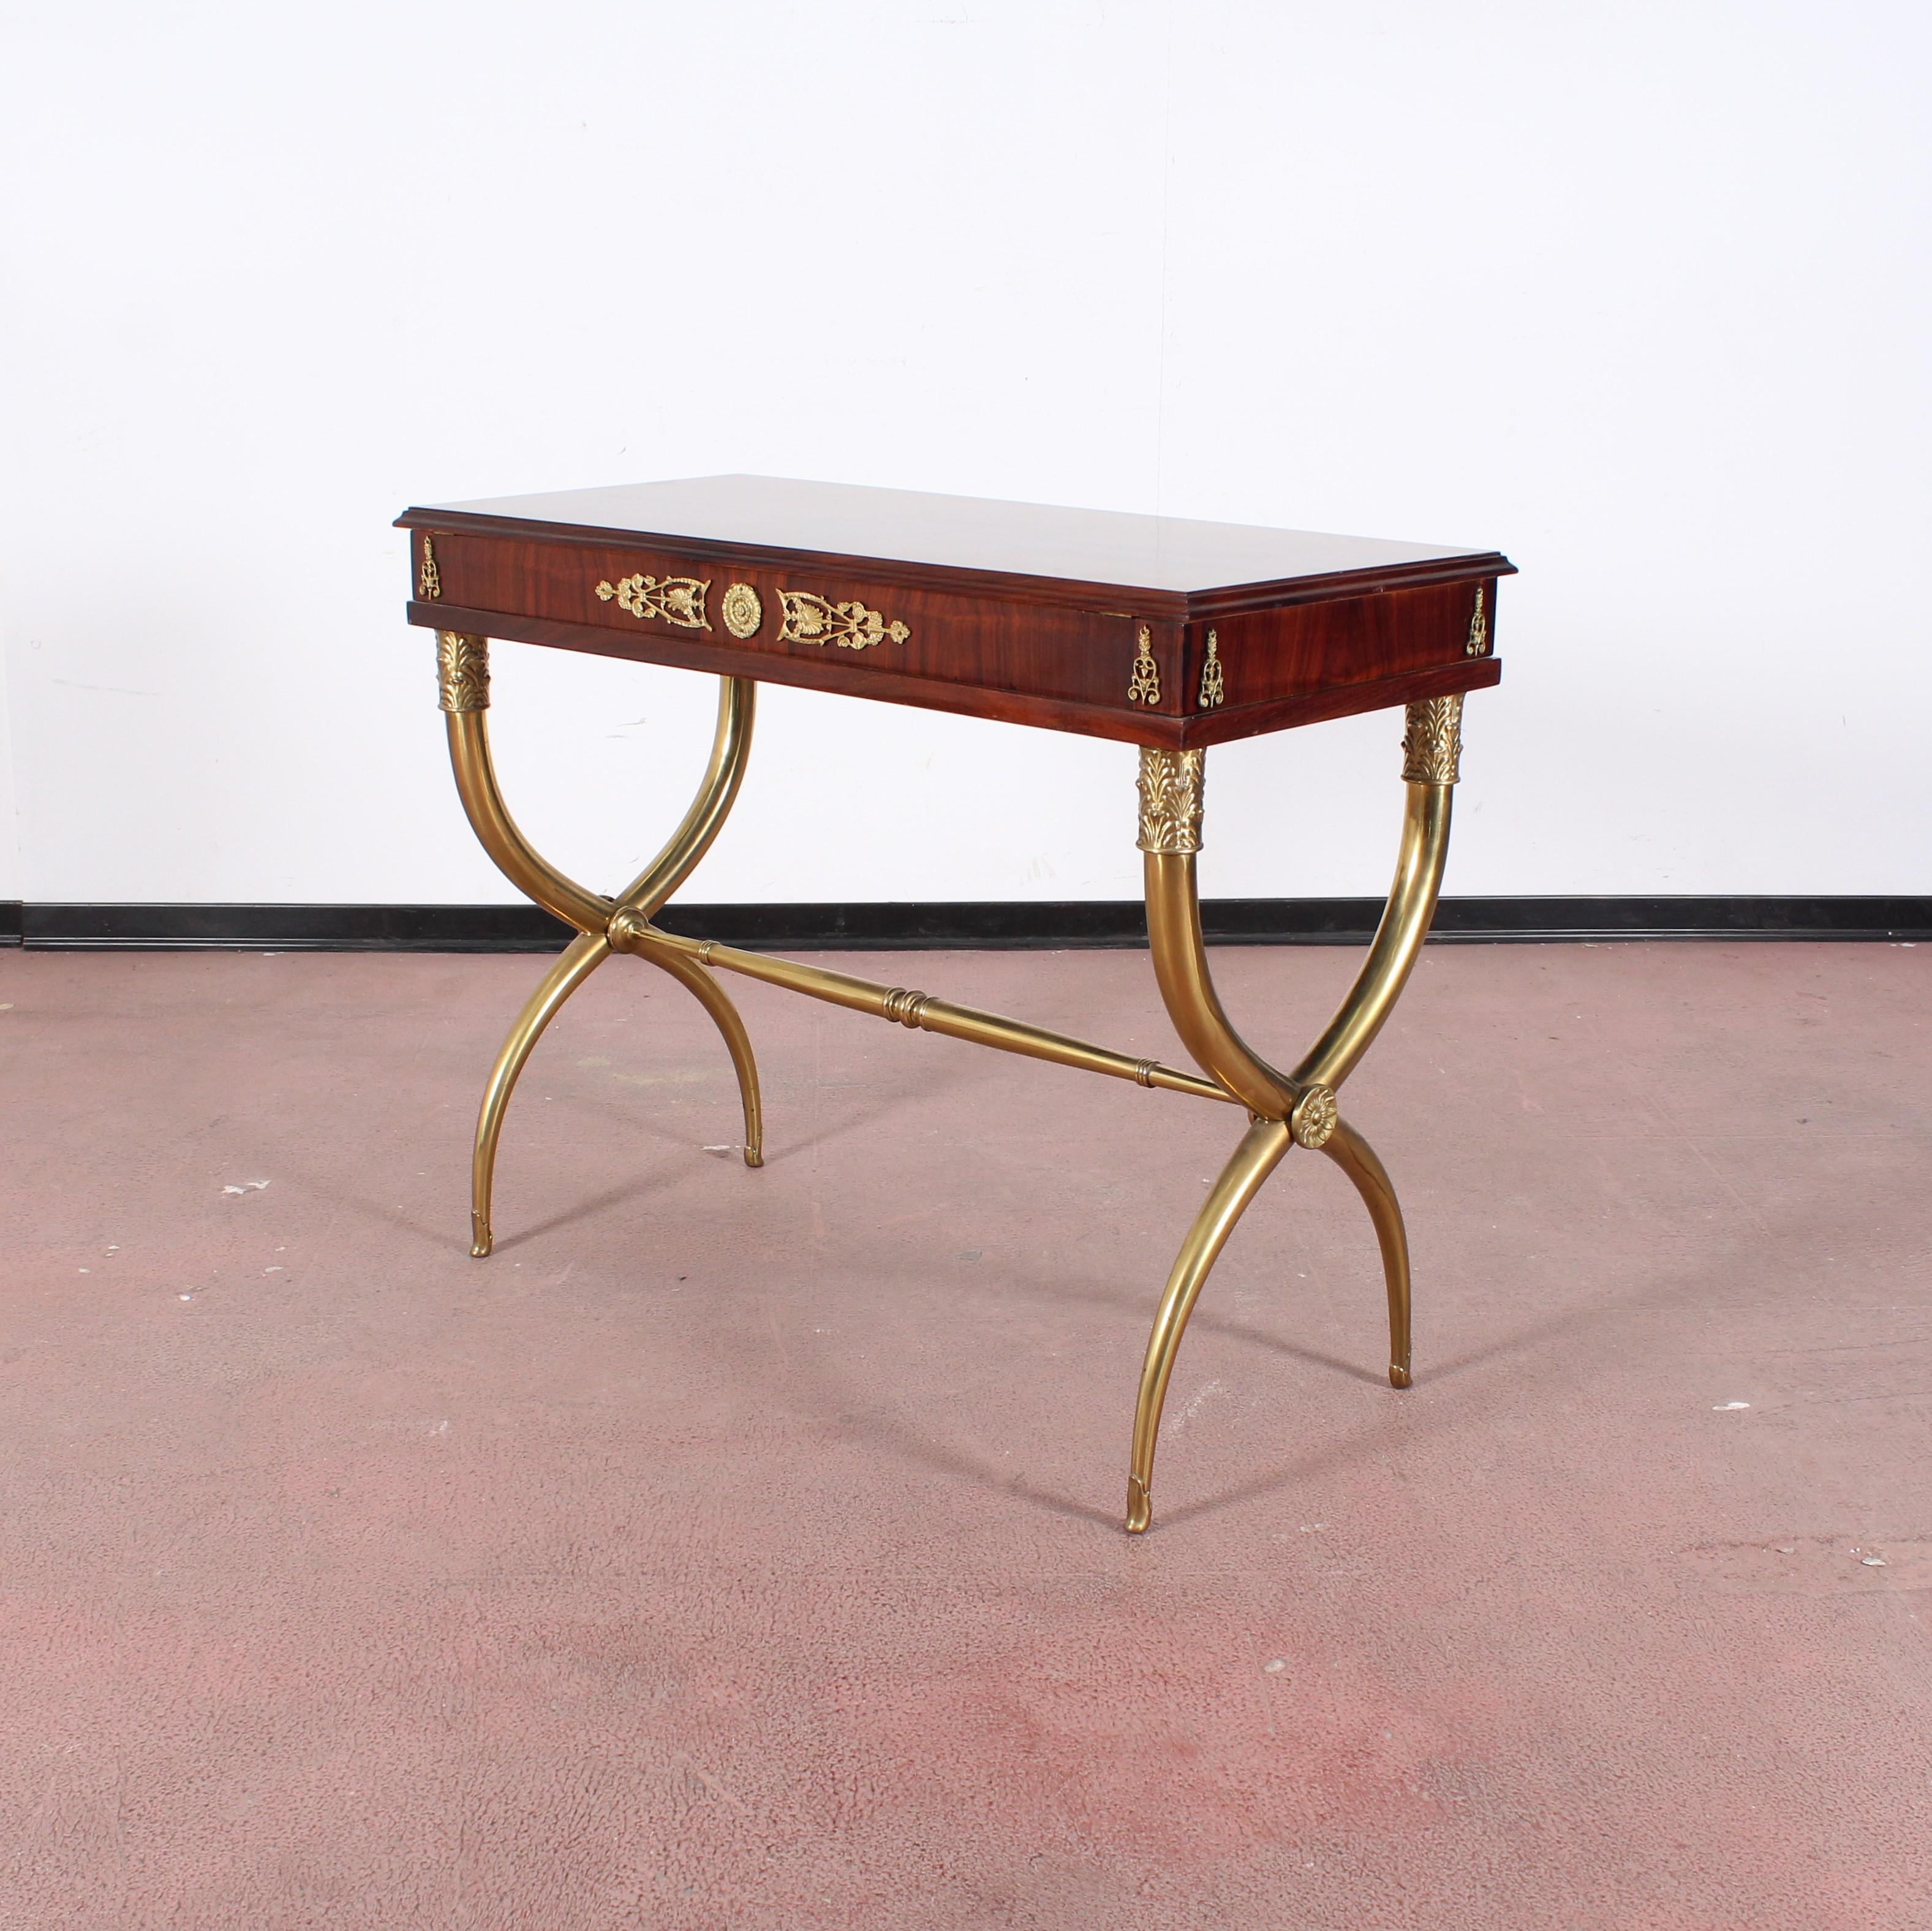 Mid-Century Modern Midcentury Gio Ponti Wood and Brass Console Table with Top Container 1950s Italy